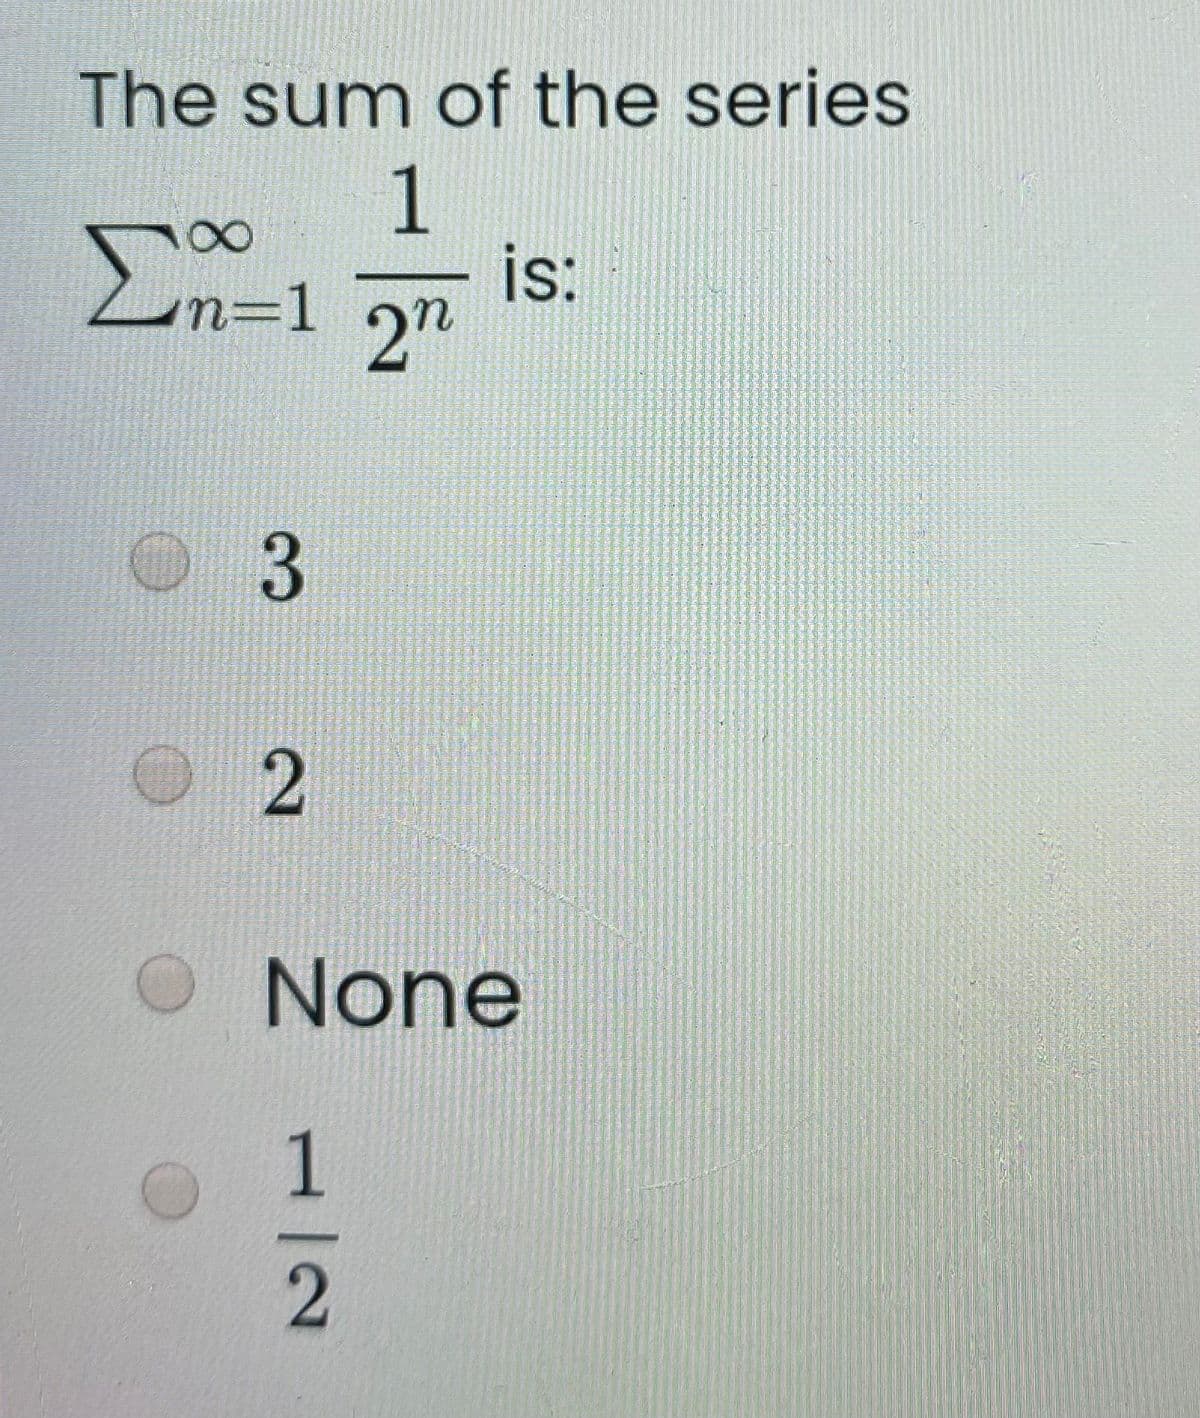 The sum of the series
is:
n=1 2"
None
1/2
